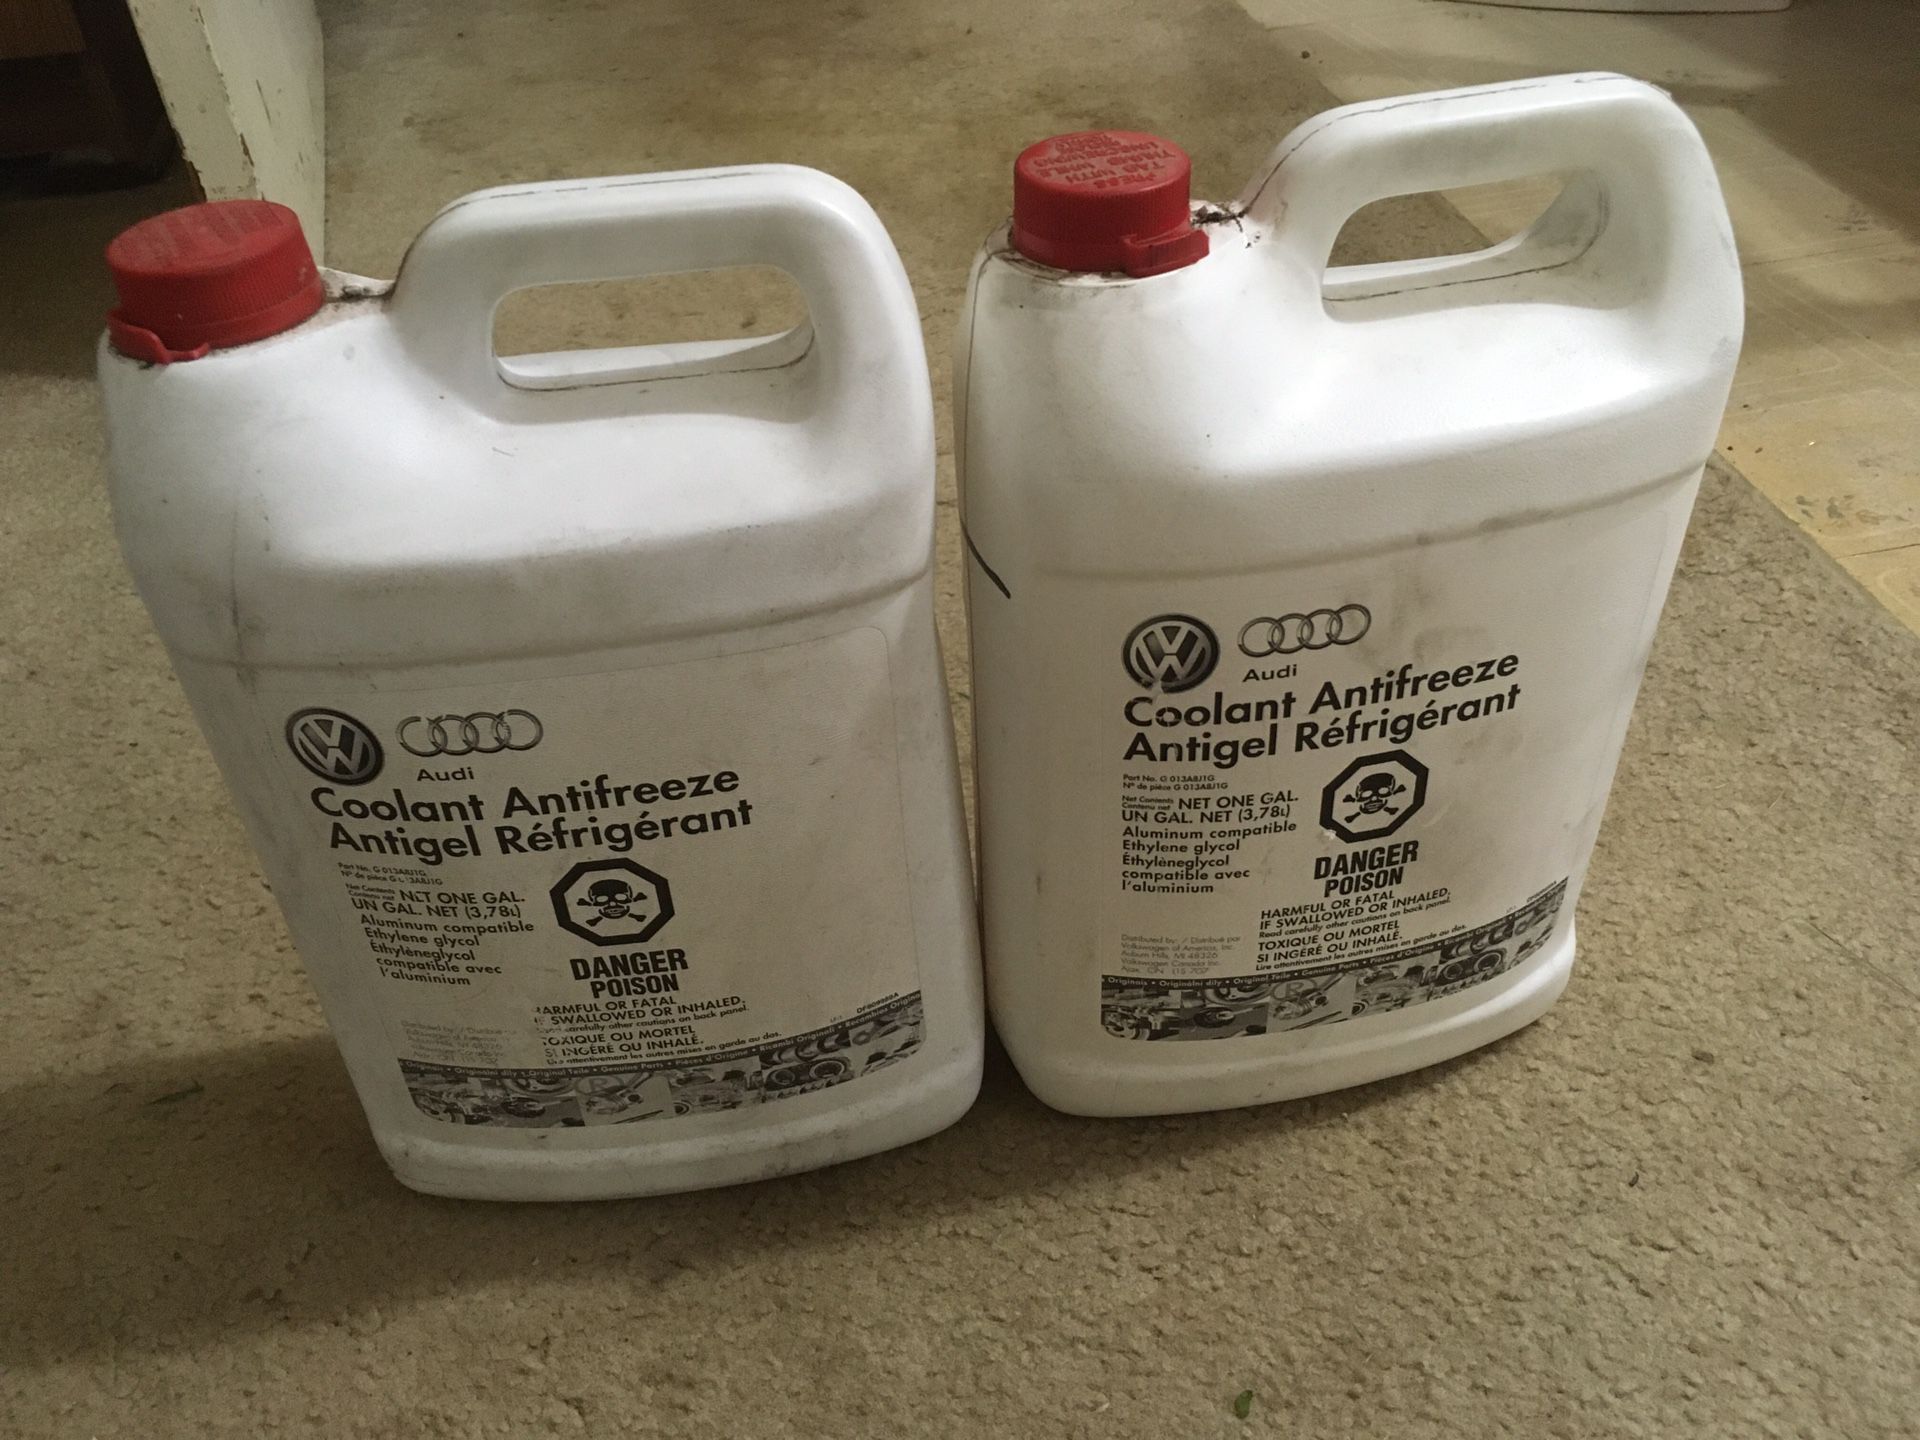 About 1.5 gal of VW pink antifreeze